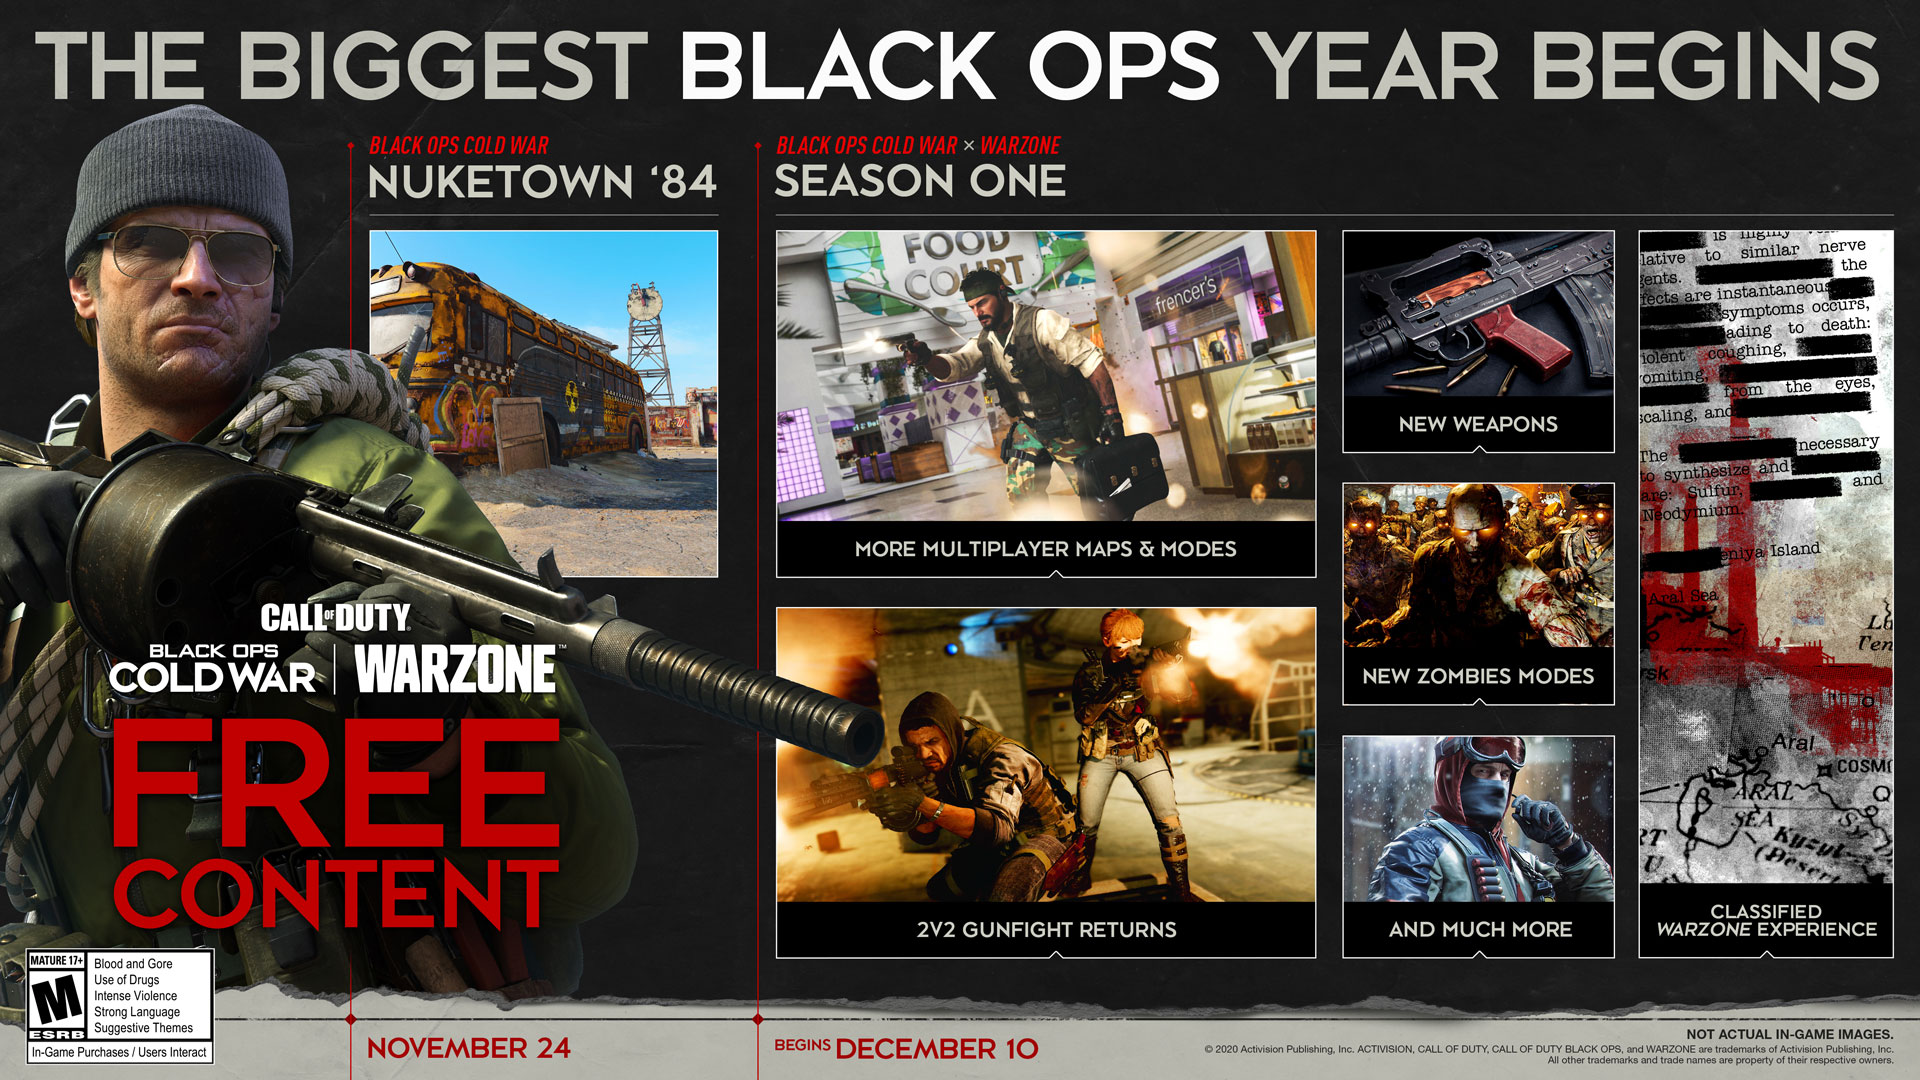 Call Of Duty Black Ops Cold War Season 1 Leaks Reveal Warzone Maps And Guns